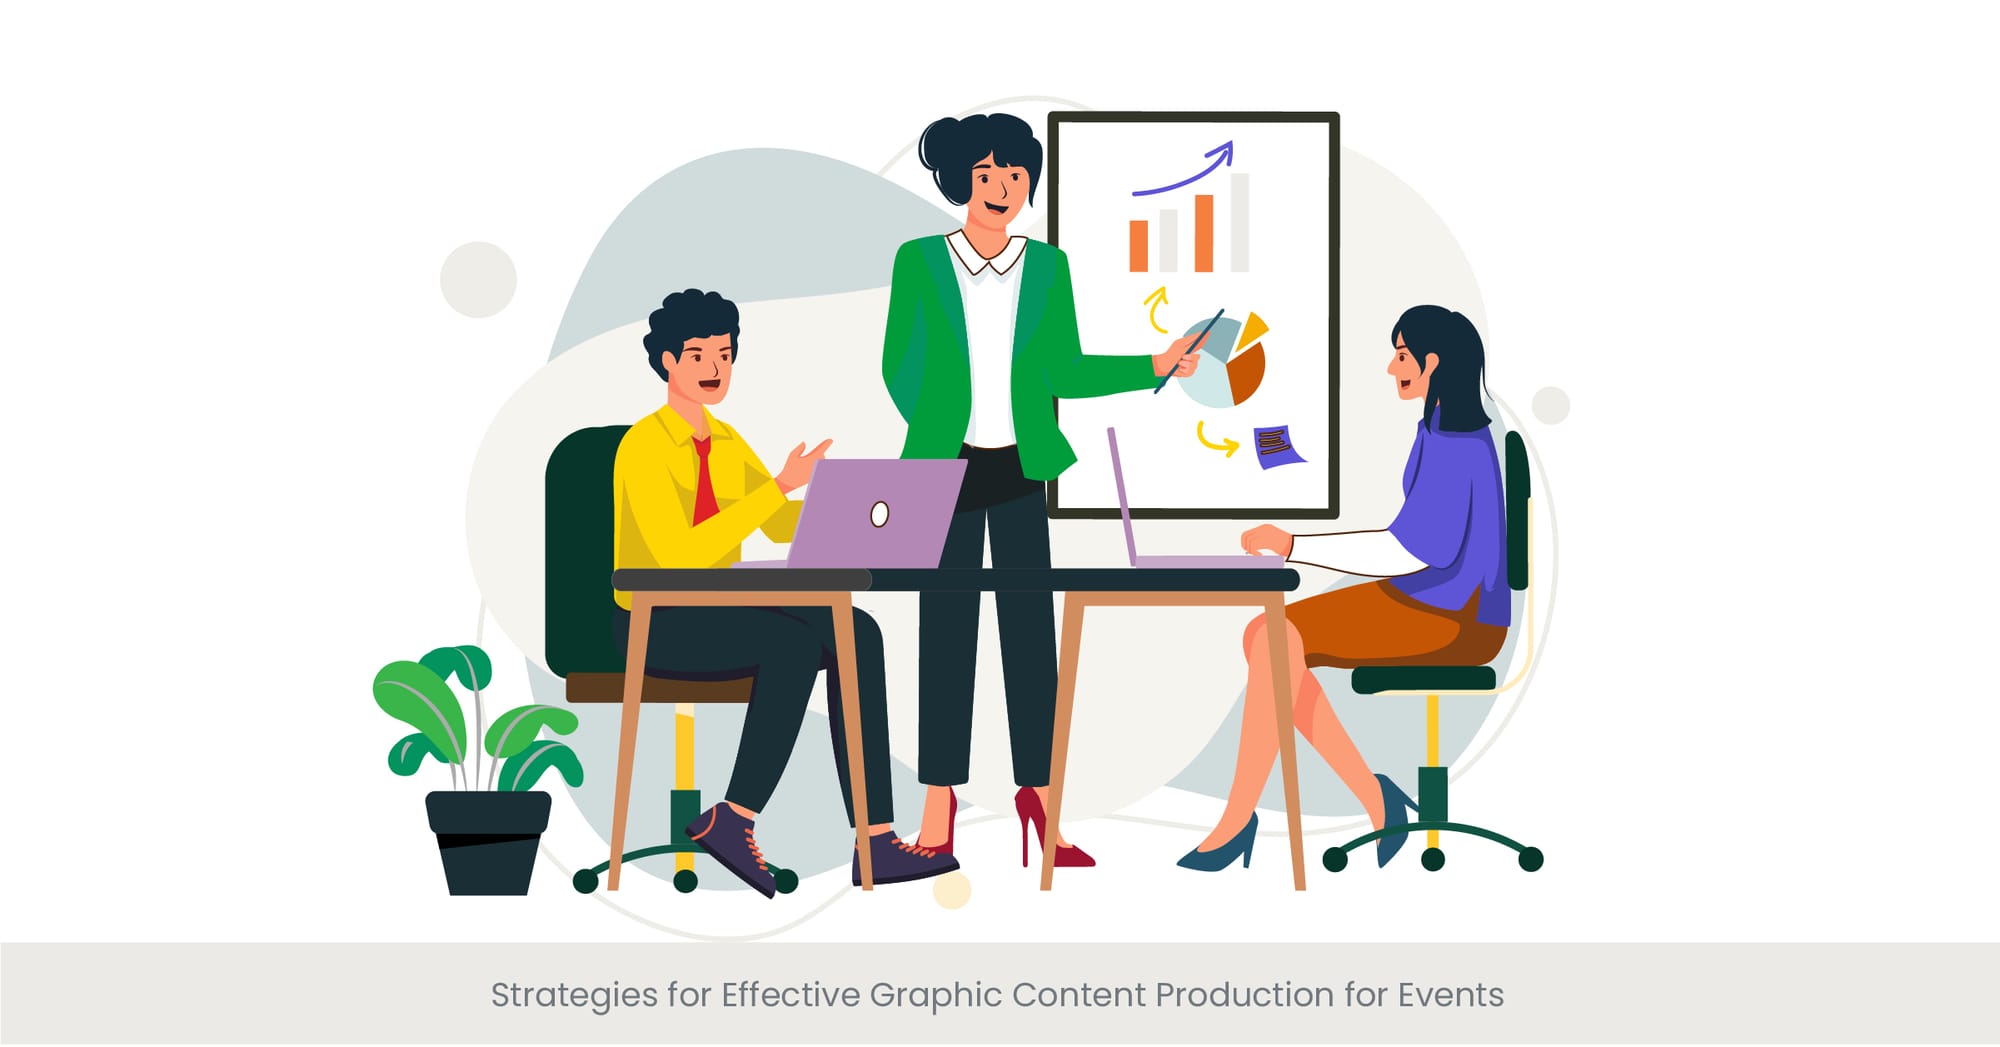 Strategies for Effective Graphic Content Production for Events